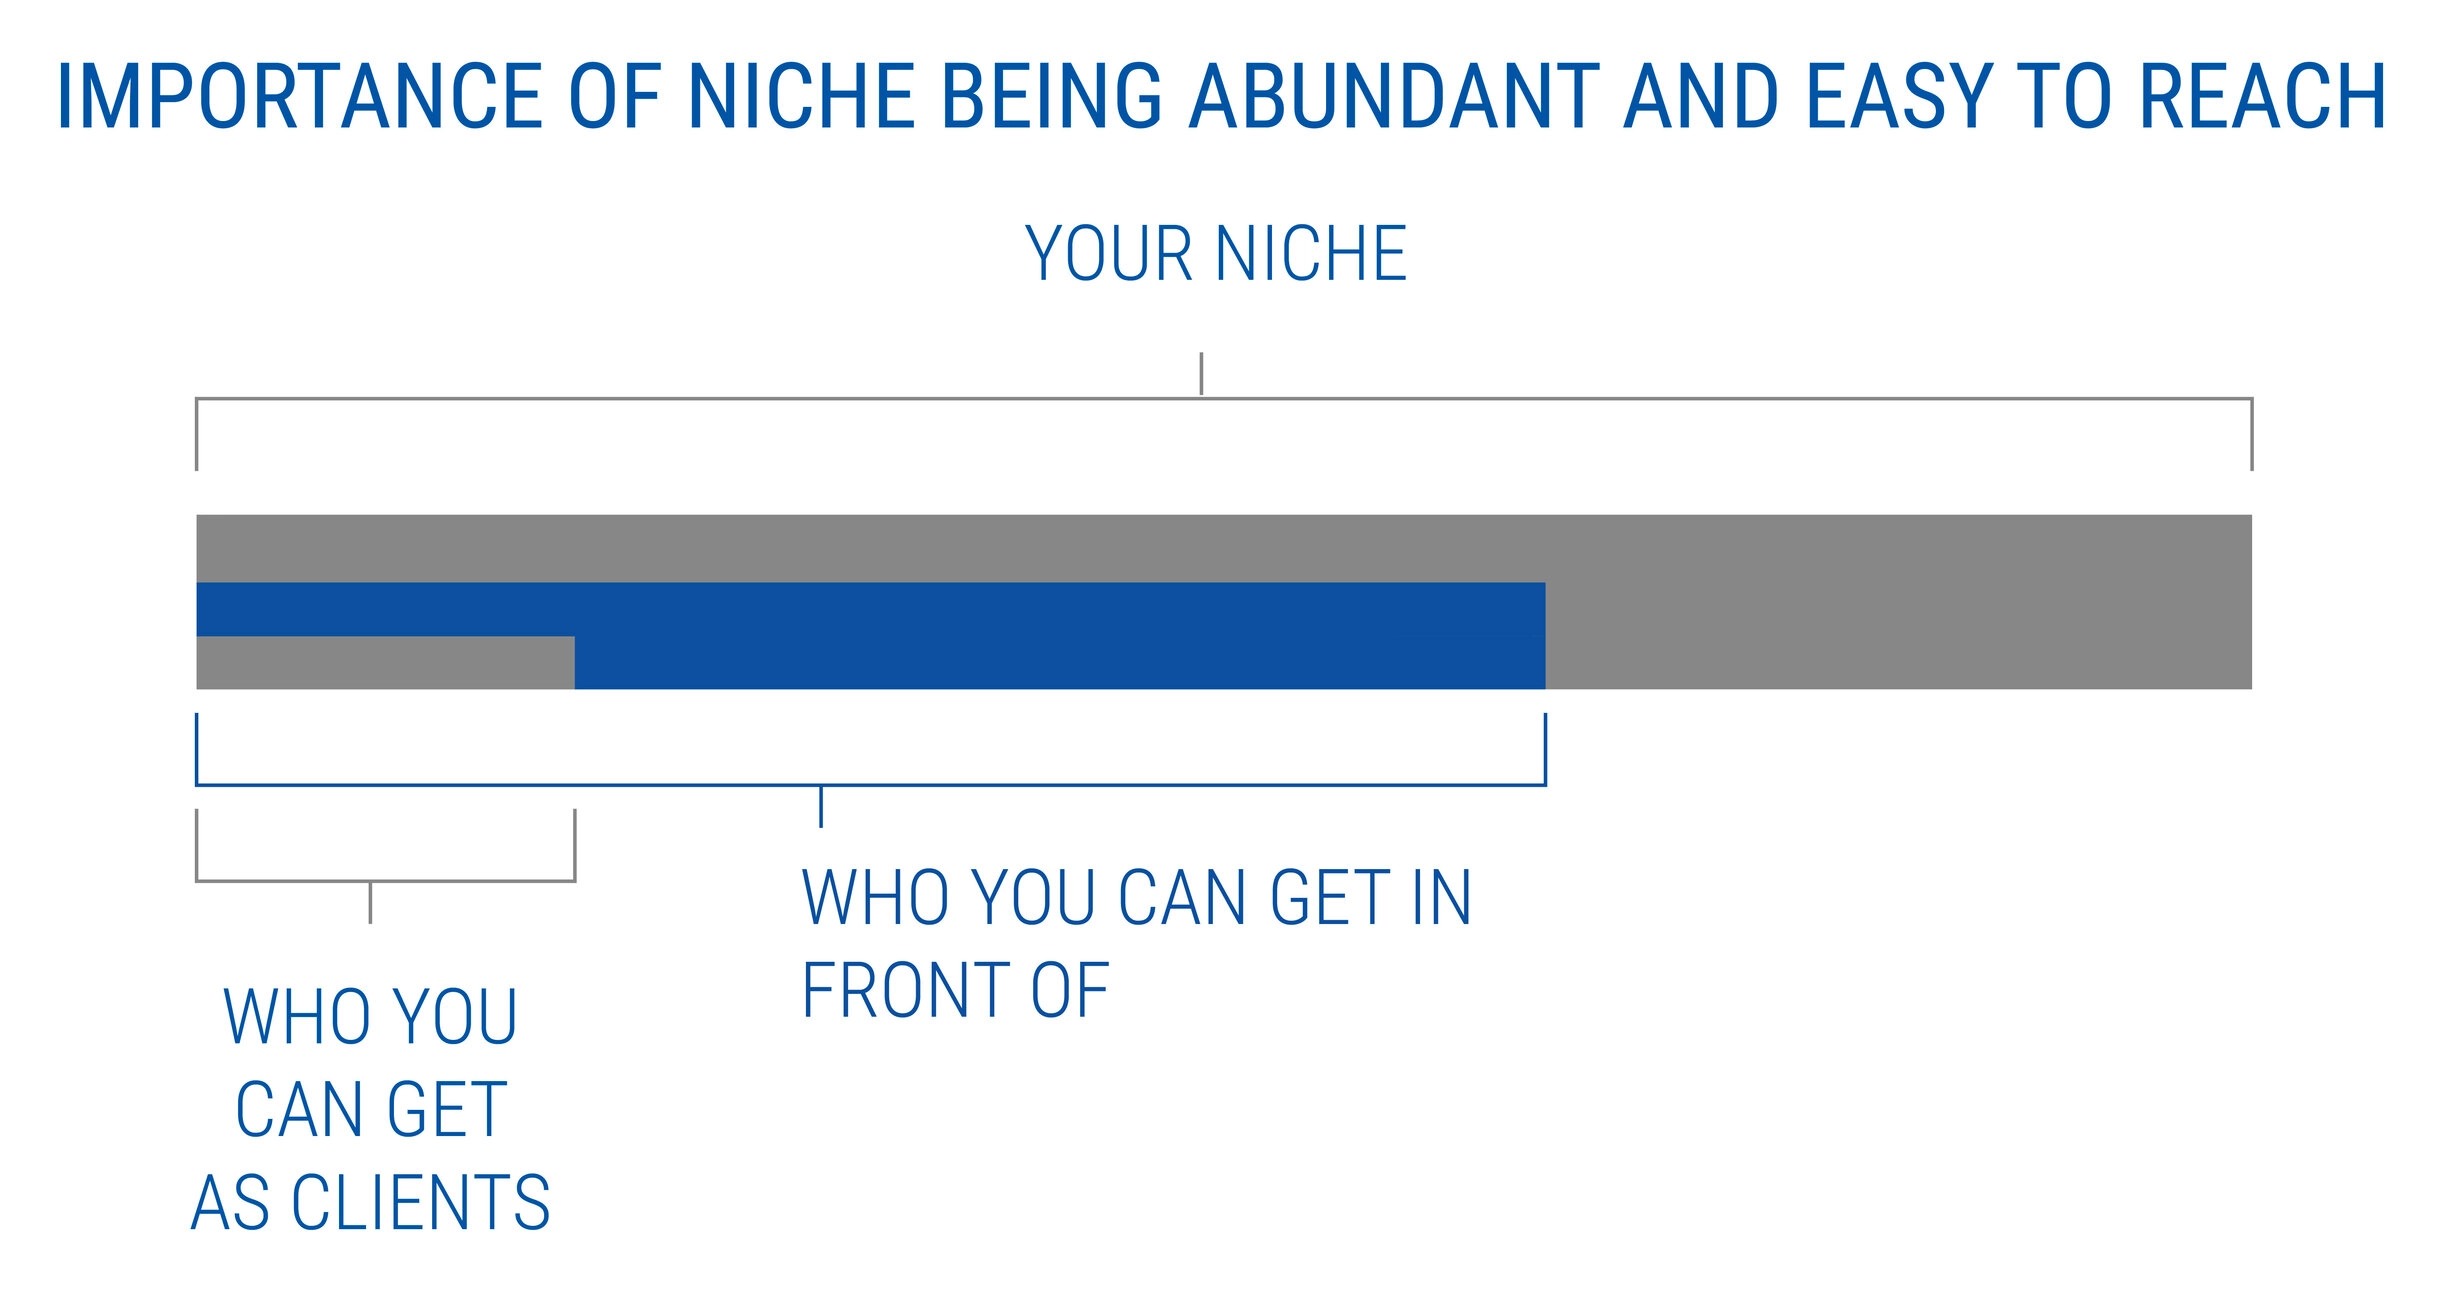 importance of niche being abundant and easy to reach - starting a coaching business while working full-time